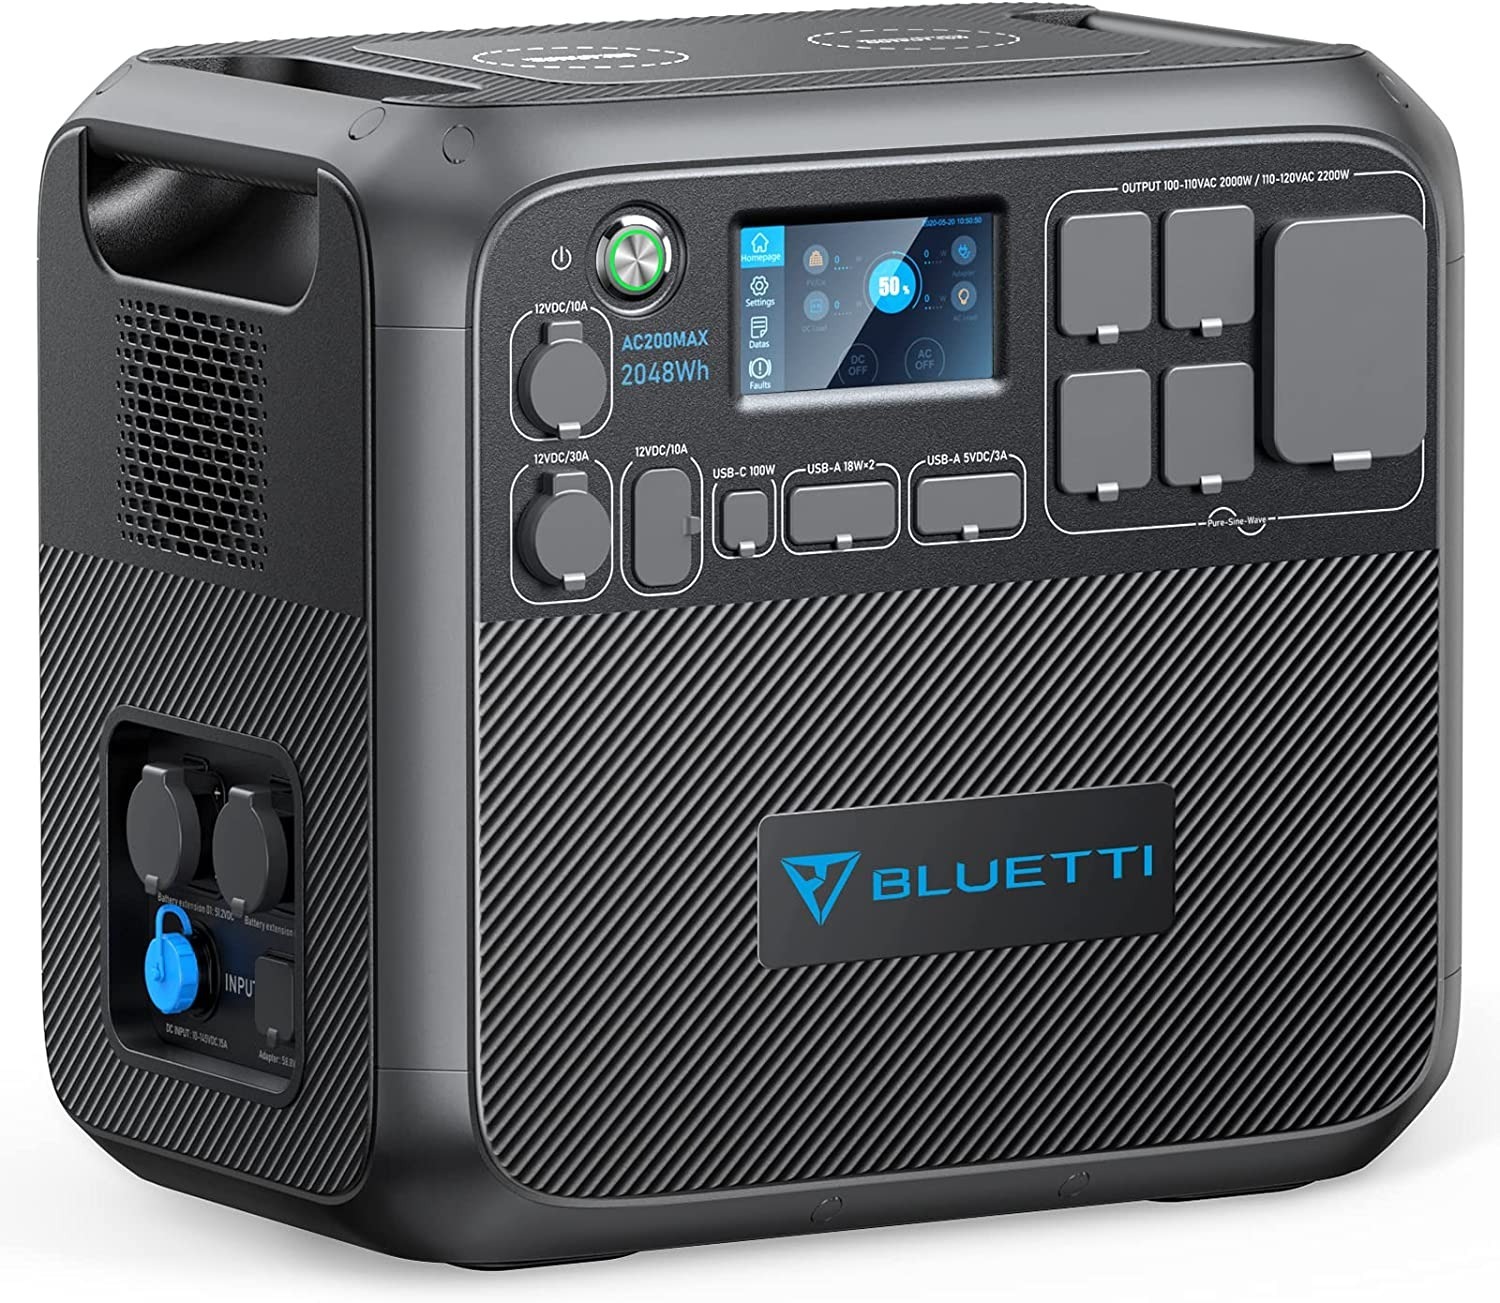 BLUETTI 2048Wh Portable Power Station (AC200MAX, LiFePO4 Battery Backup, x4 2200W AC Outlets, 4800W Peak) $1699 + Free Shipping